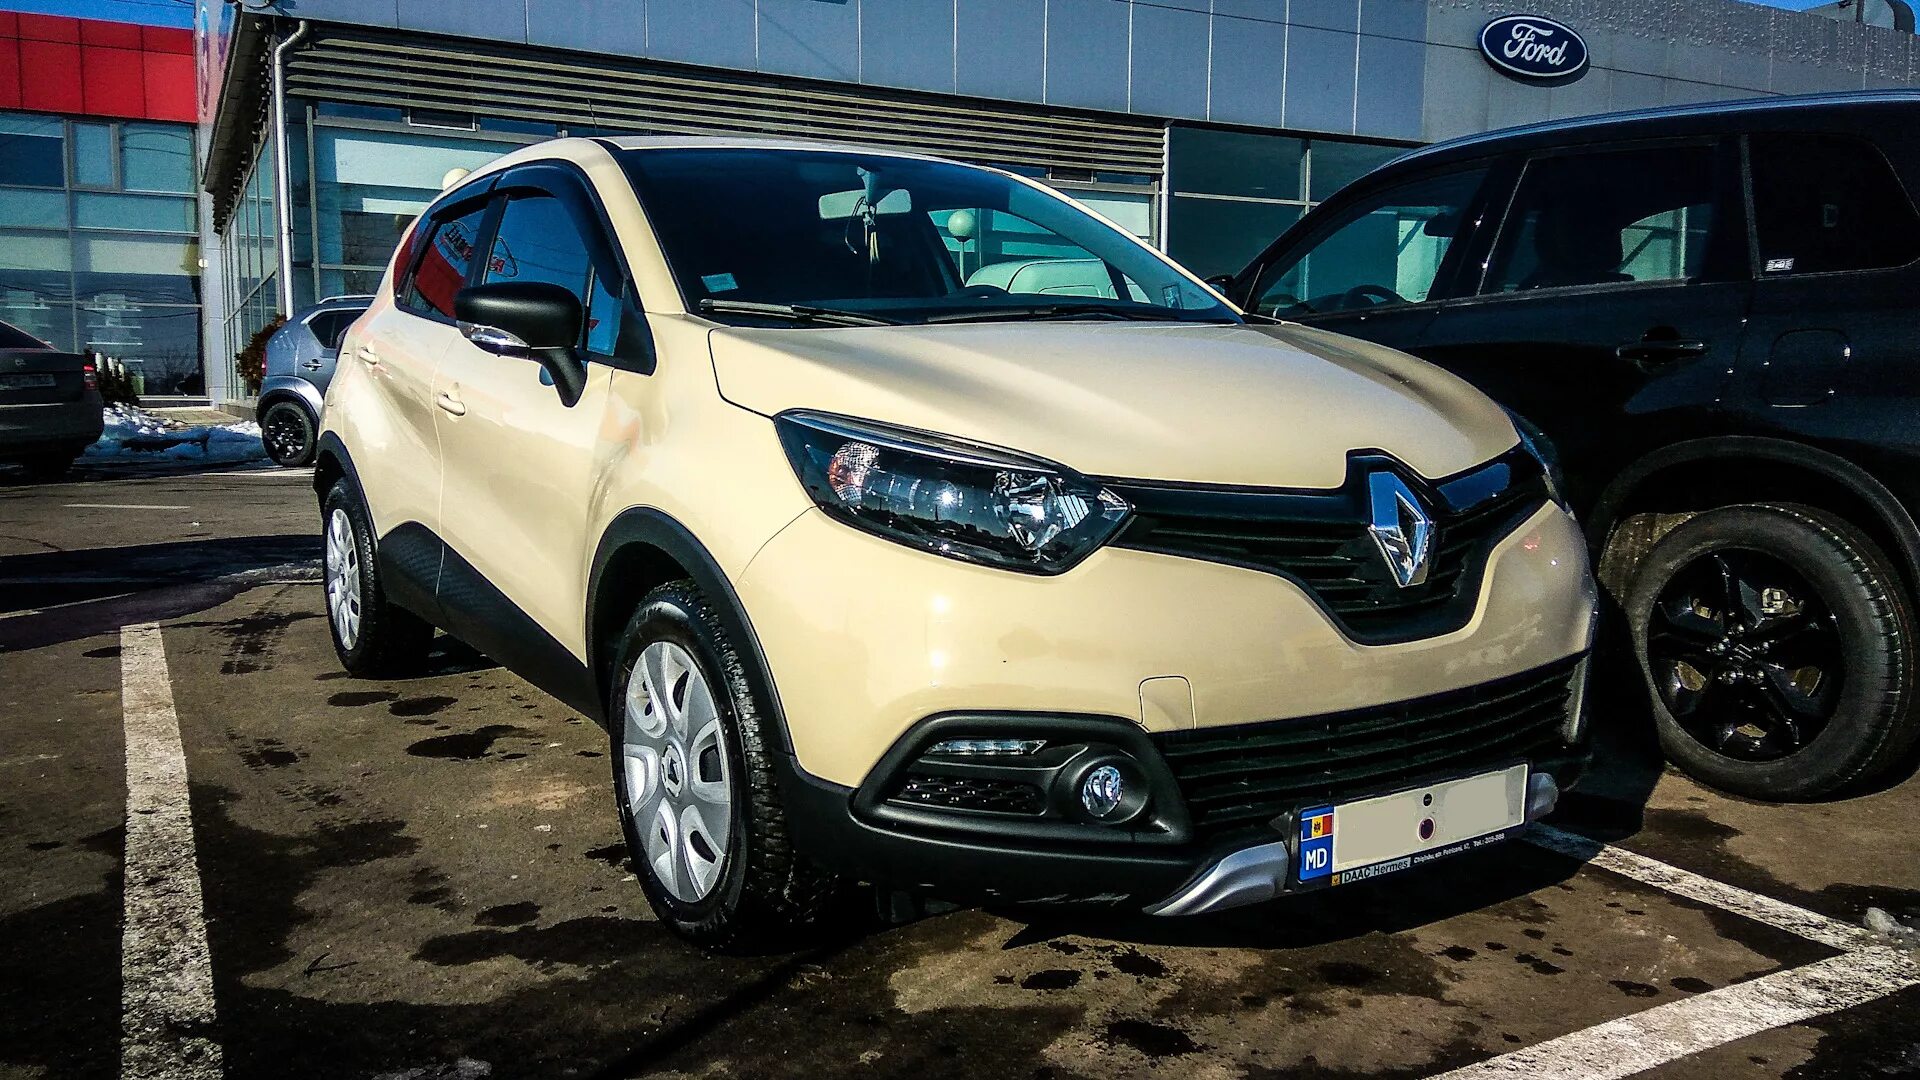 Рено каптур 1.3 масло. Внедорожный бампер на Рено Каптур. Renault Kaptur Offroad Tuning. Рено Каптур внедорожный обвес. Renault Captur off Road Tuning.